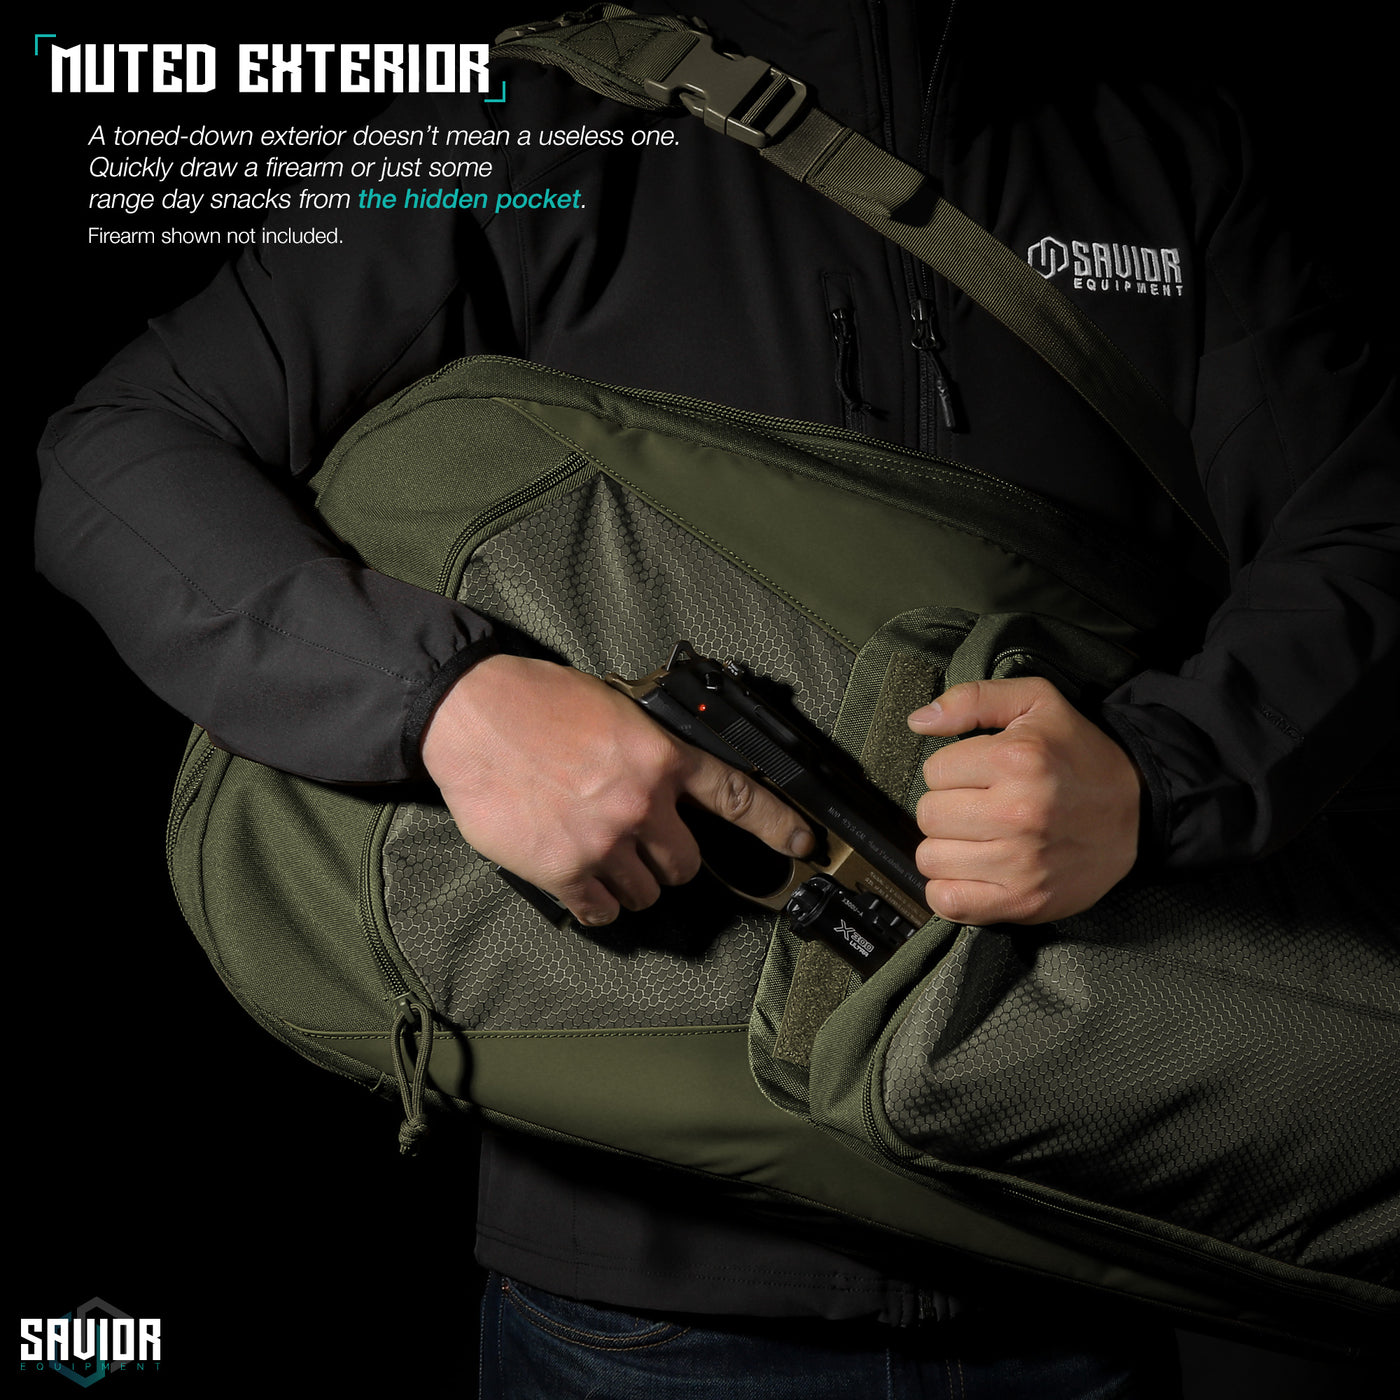 Muted Exterior - A toned-down exterior doesn't mean a useless one. Quickly draw a firearm or just some range day snacks from the hidden pocket. Firearms shown not included.